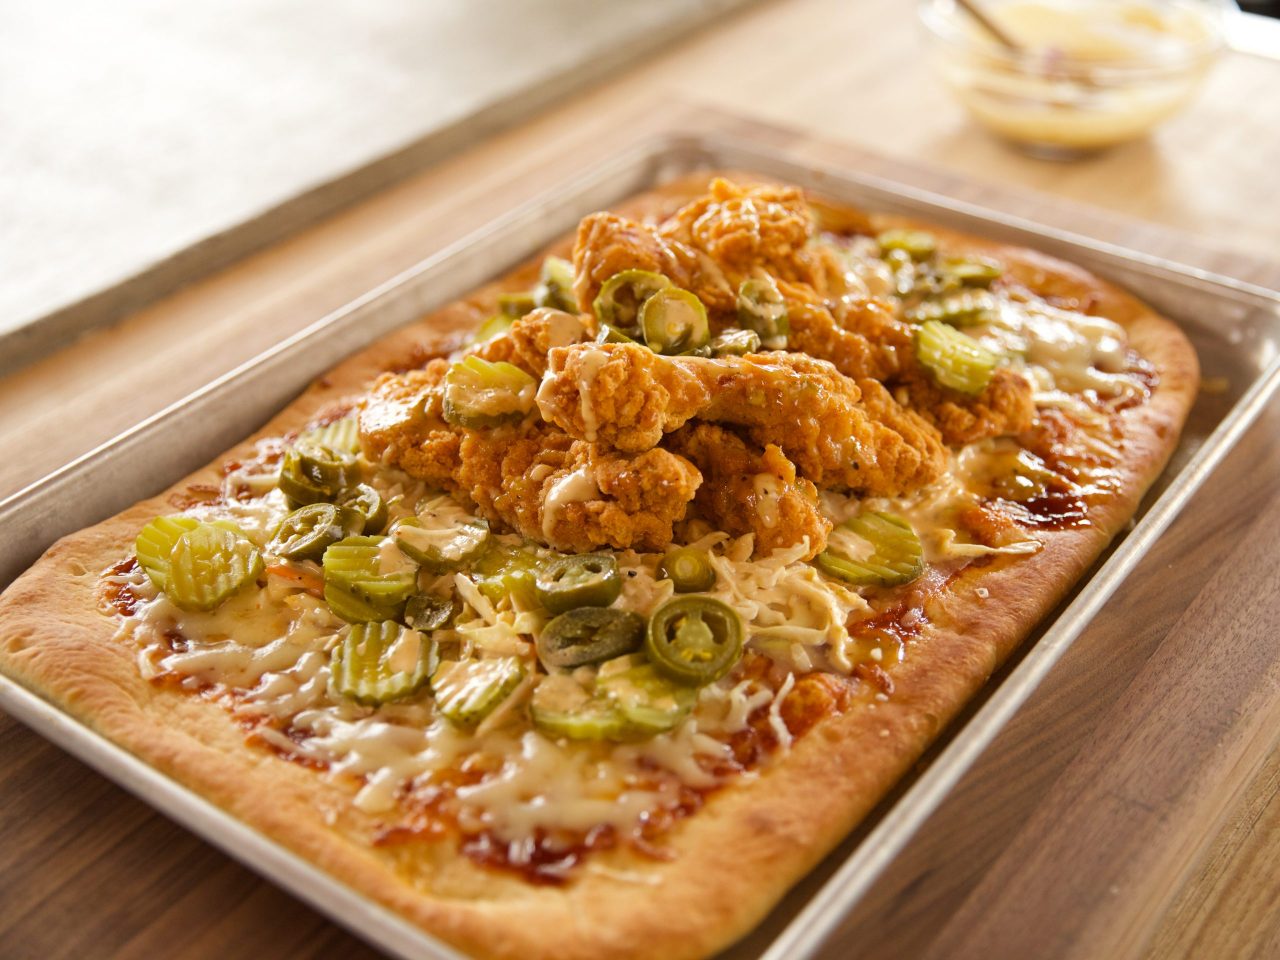 Ree Drummond's Fried Chicken Pizza, as seen on The Pioneer Woman.